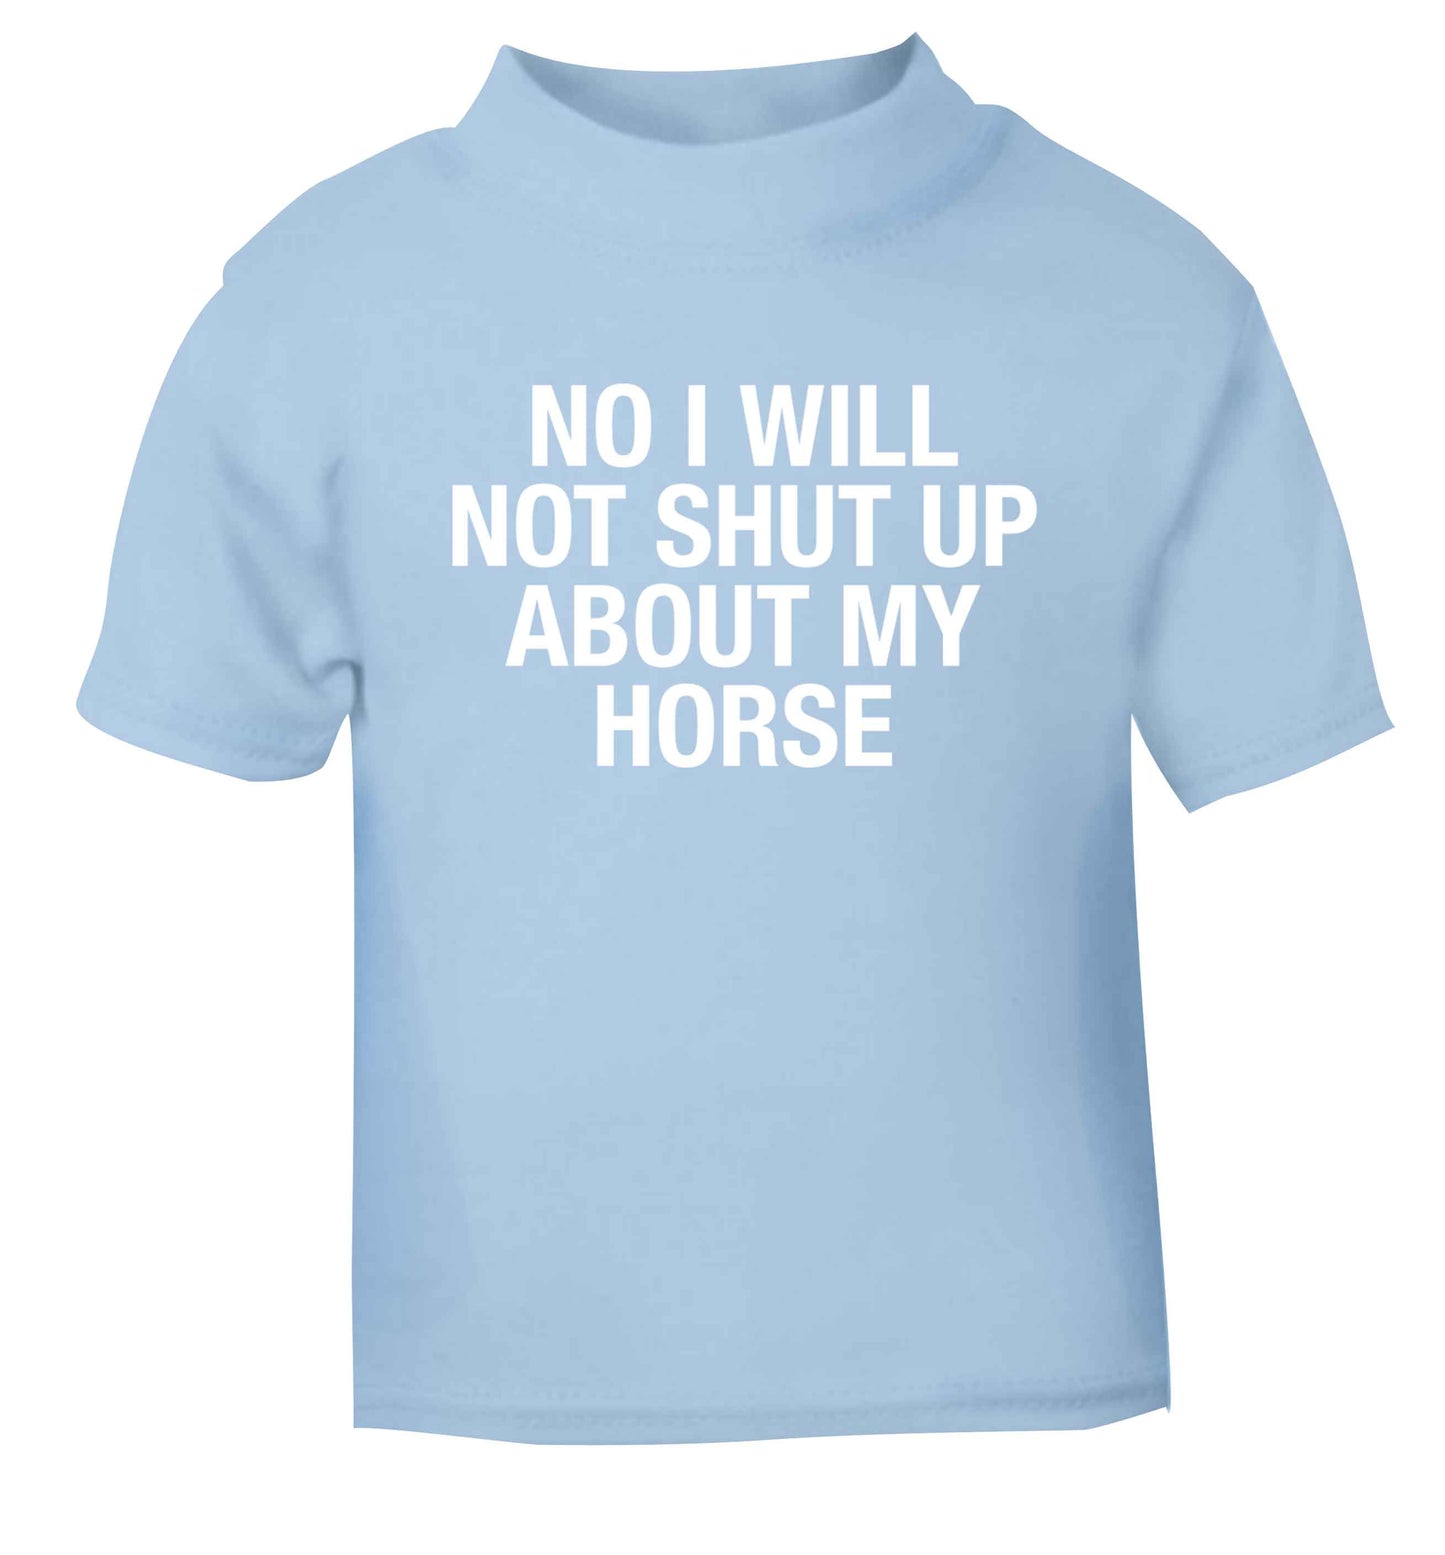 No I will not shut up talking about my horse light blue baby toddler Tshirt 2 Years